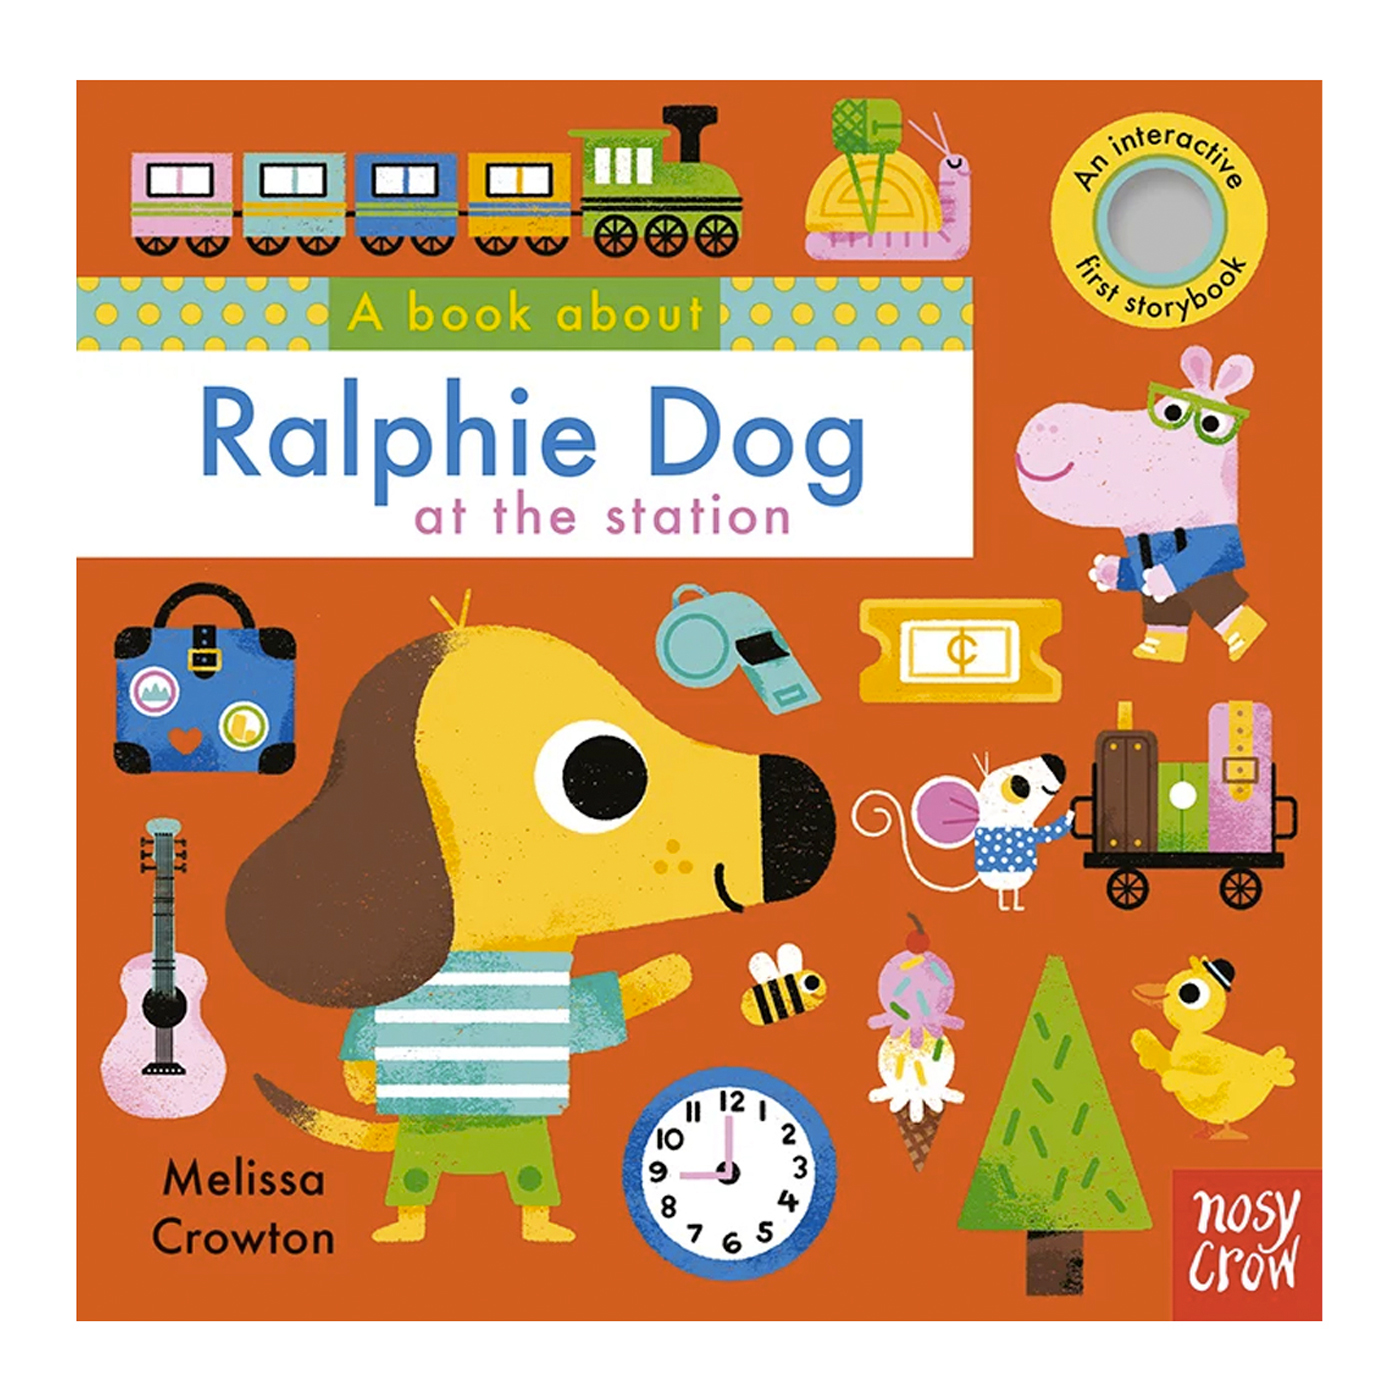  A book about Ralphie Dog at the station